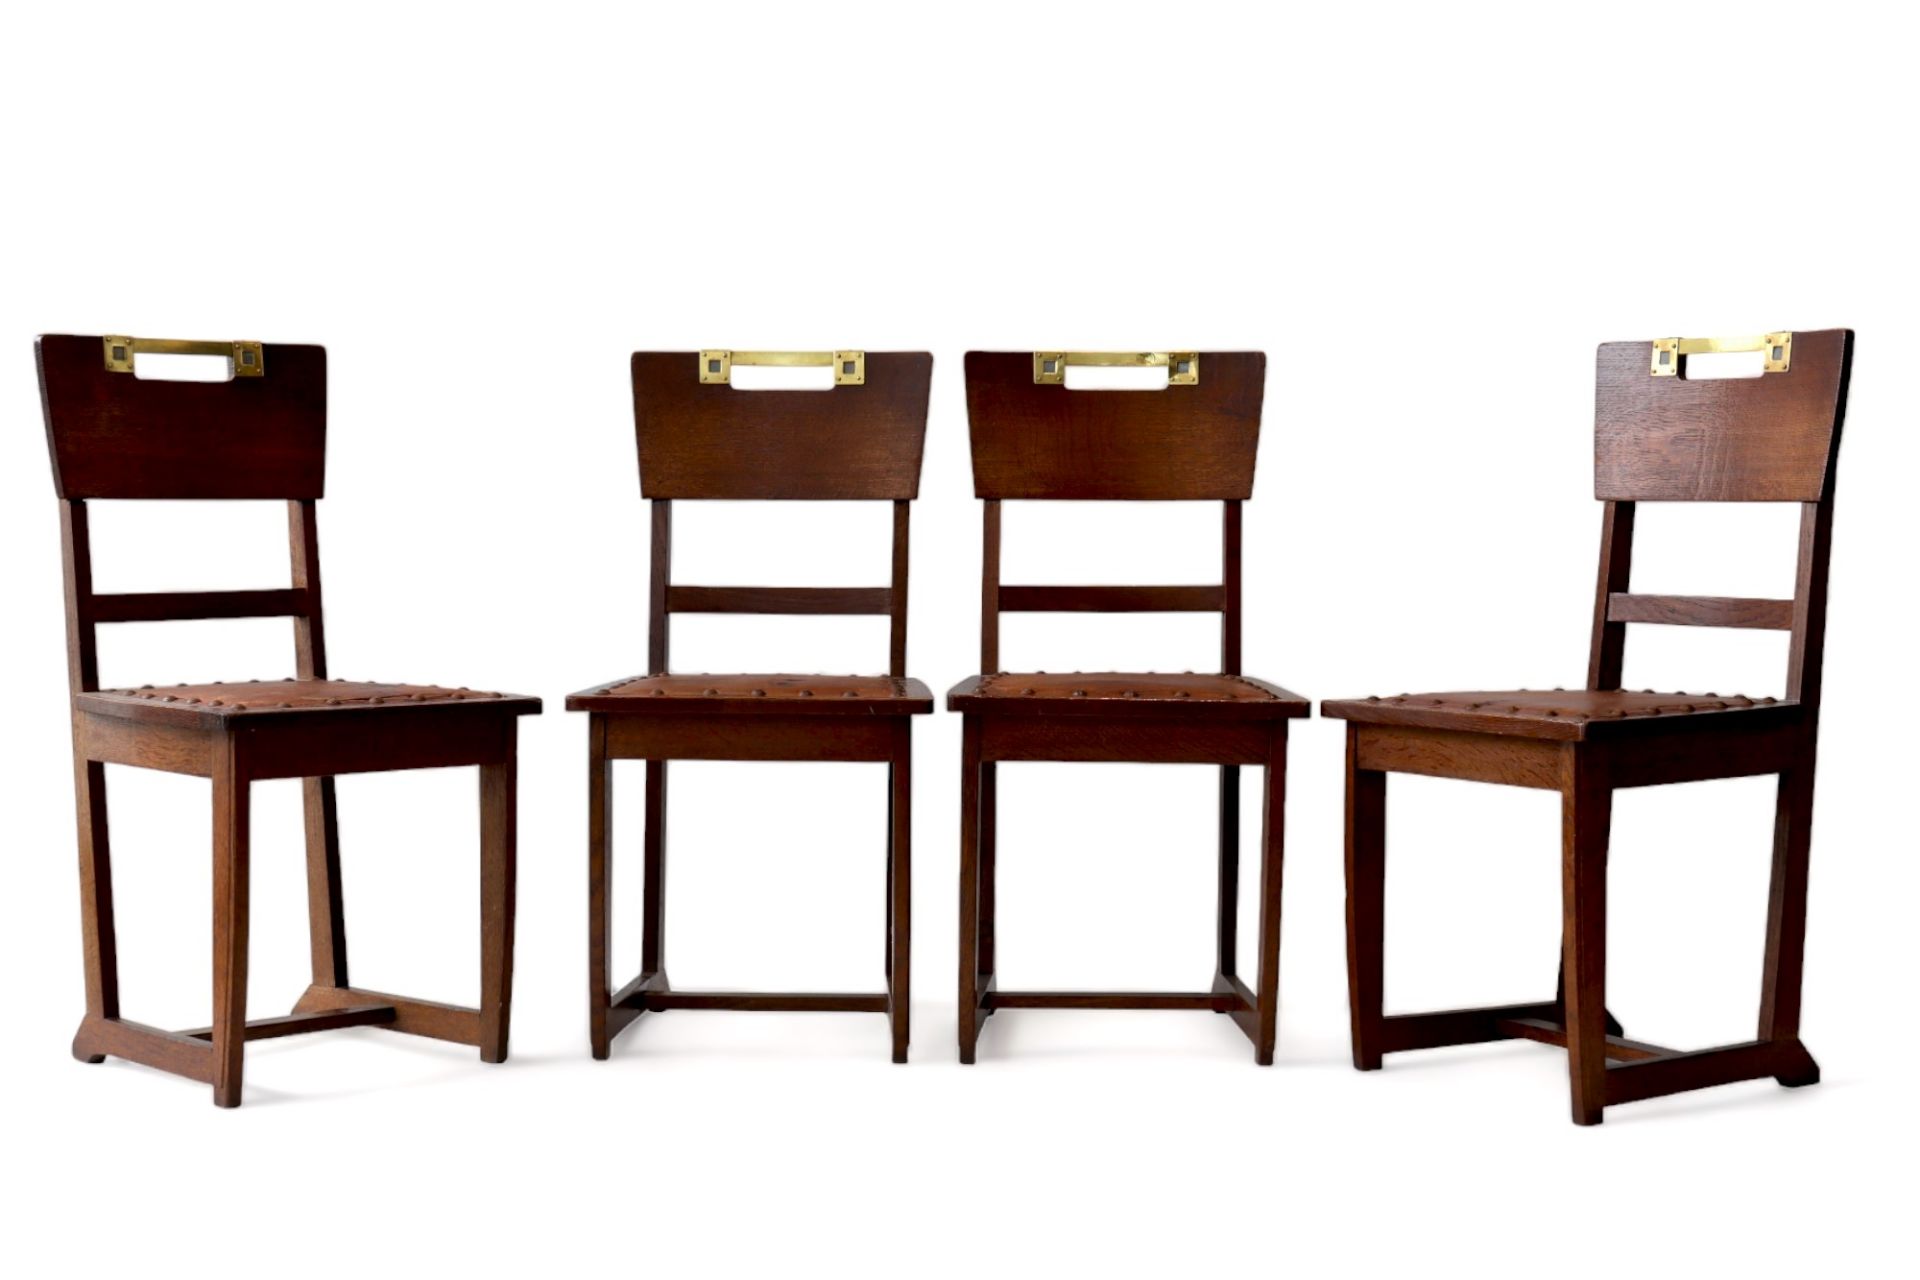 Gustave SERRURIER BOVY (1858-1910) Chairs (4) rare "oak and brass" model